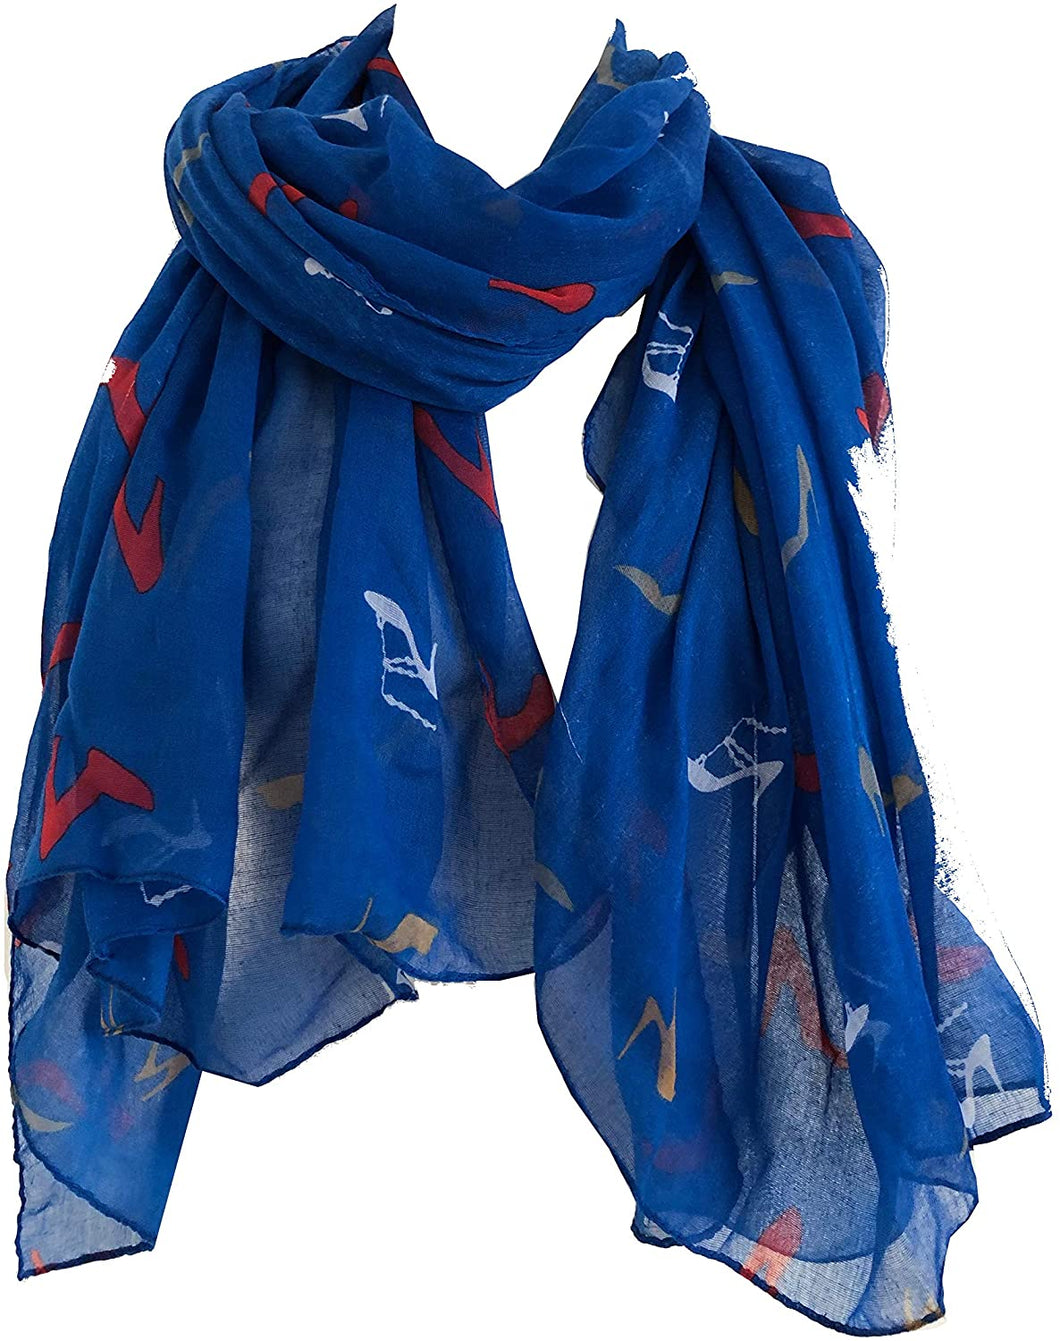 Pamper Yourself Now Blue high Heels Pattern Long Scarf, Soft Ladies Fashion London